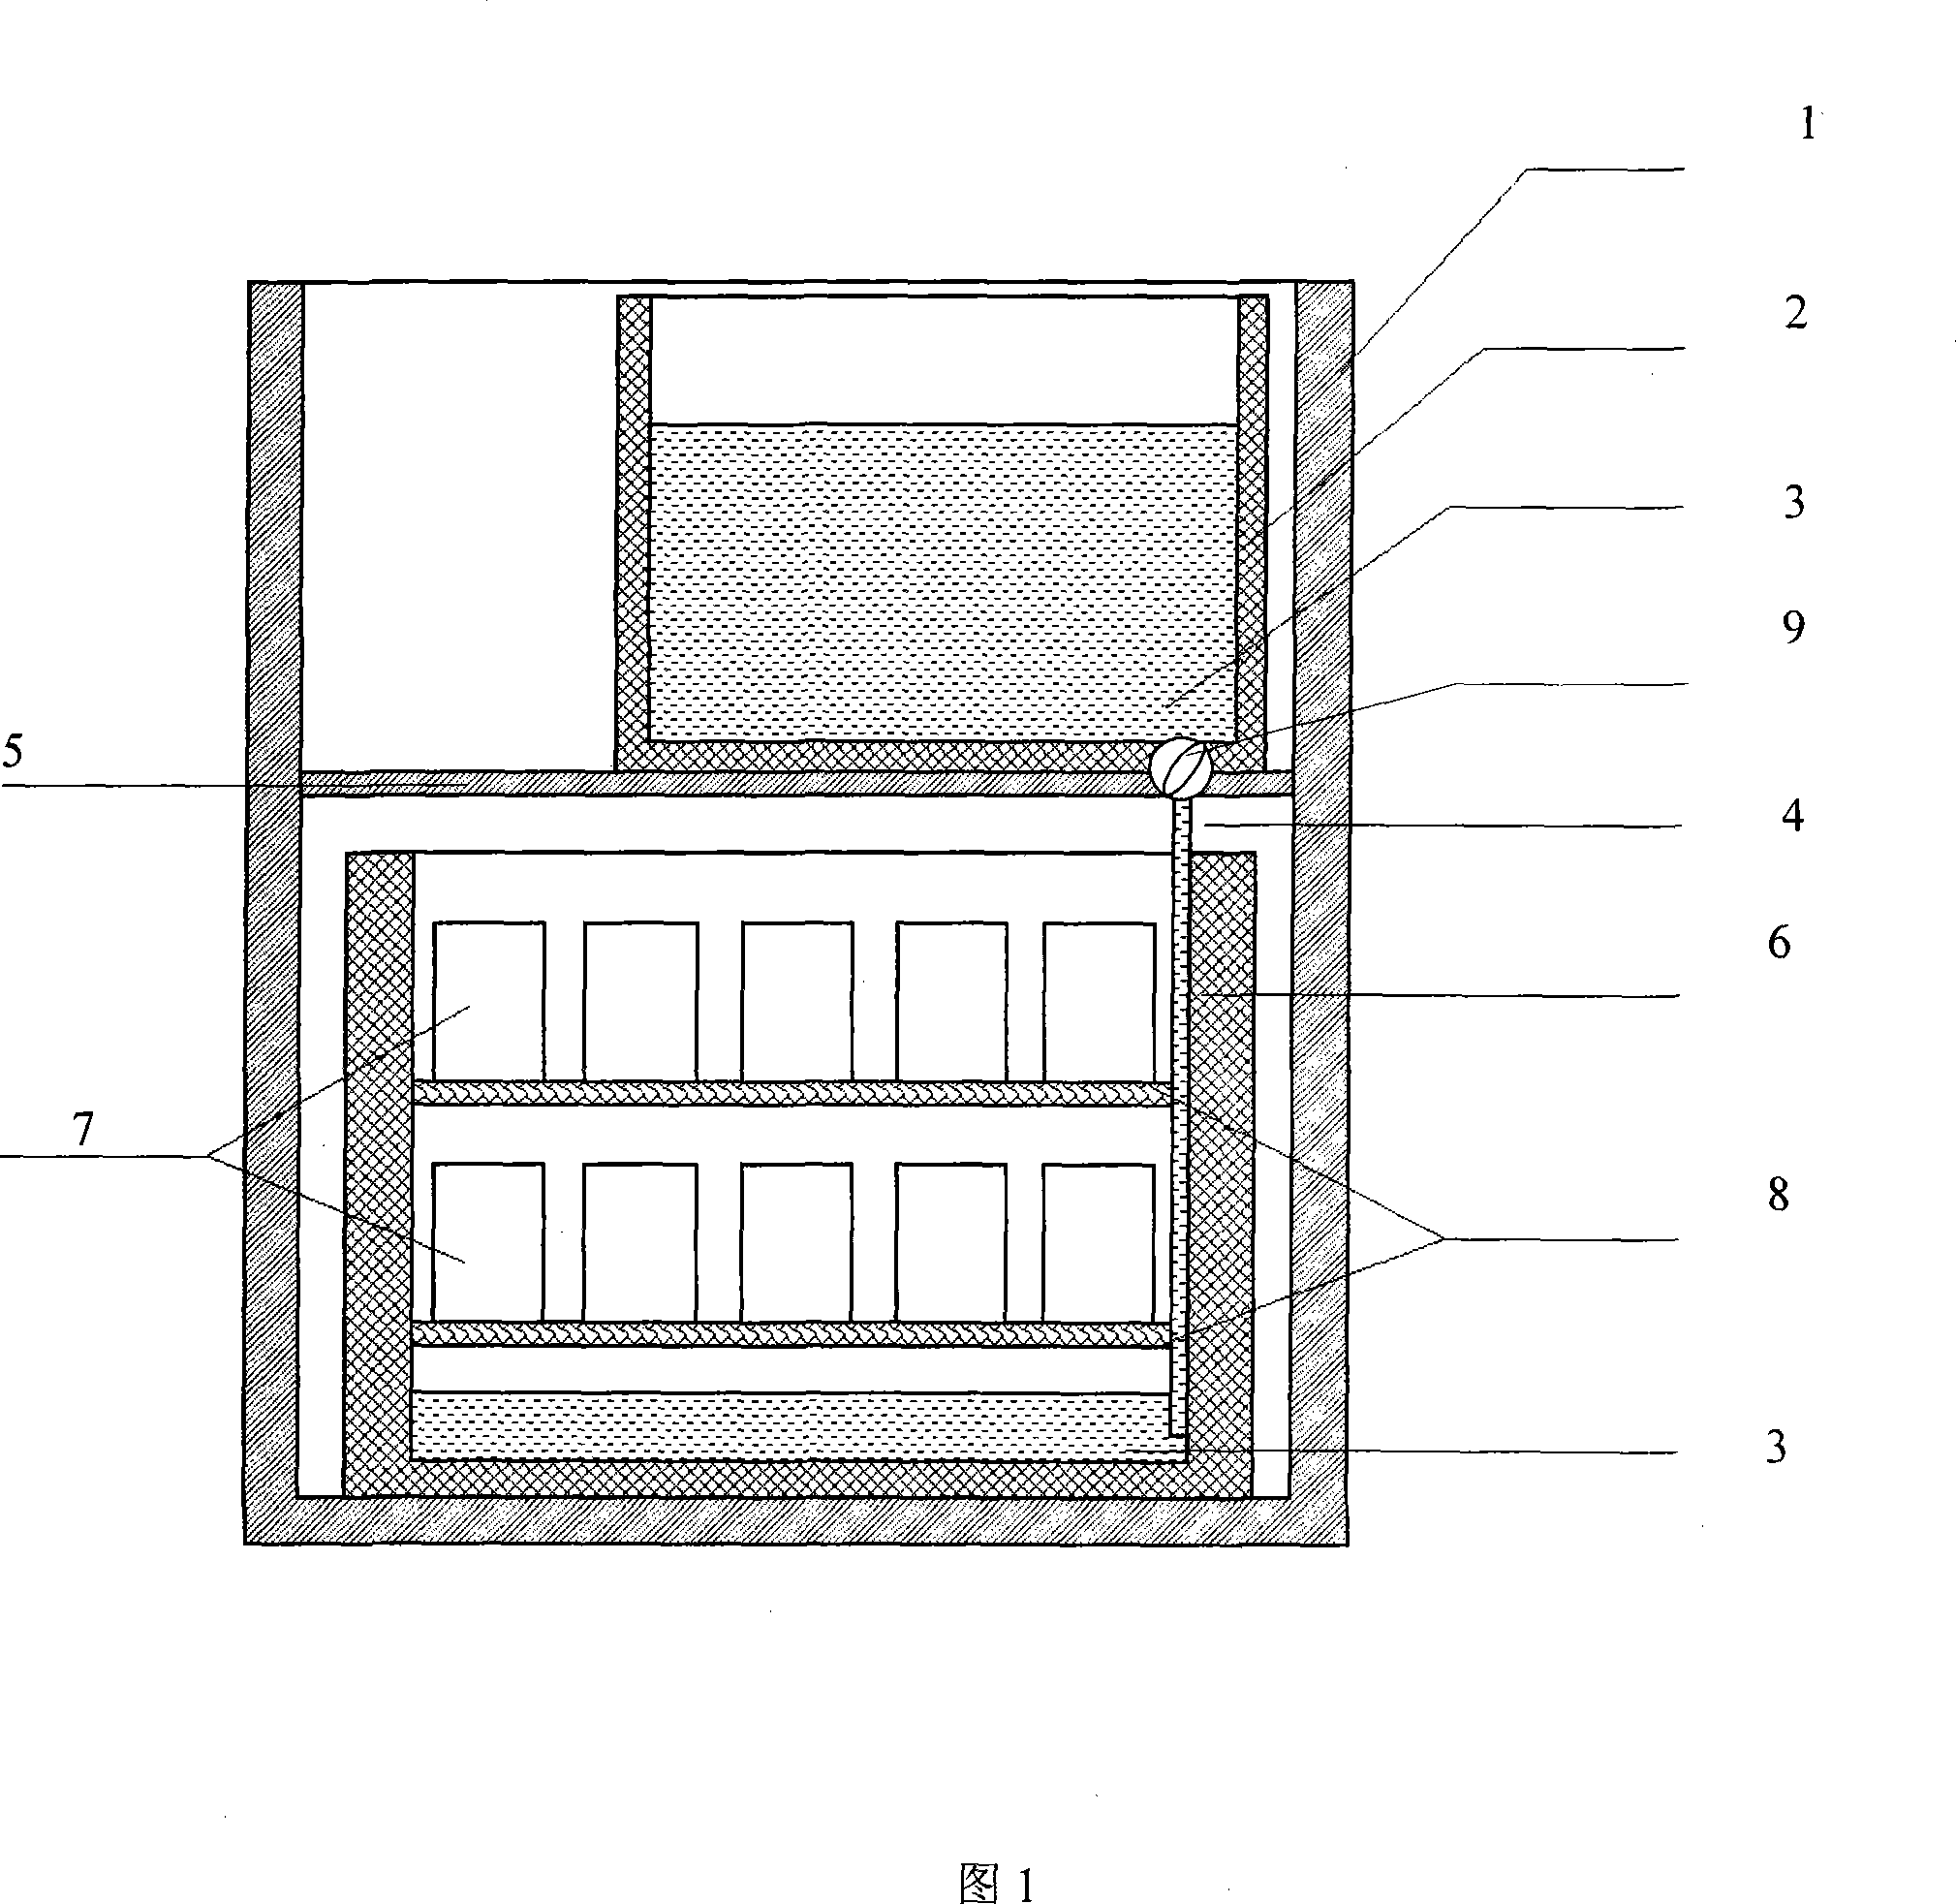 Impregnation forming method for capacitor core assembly